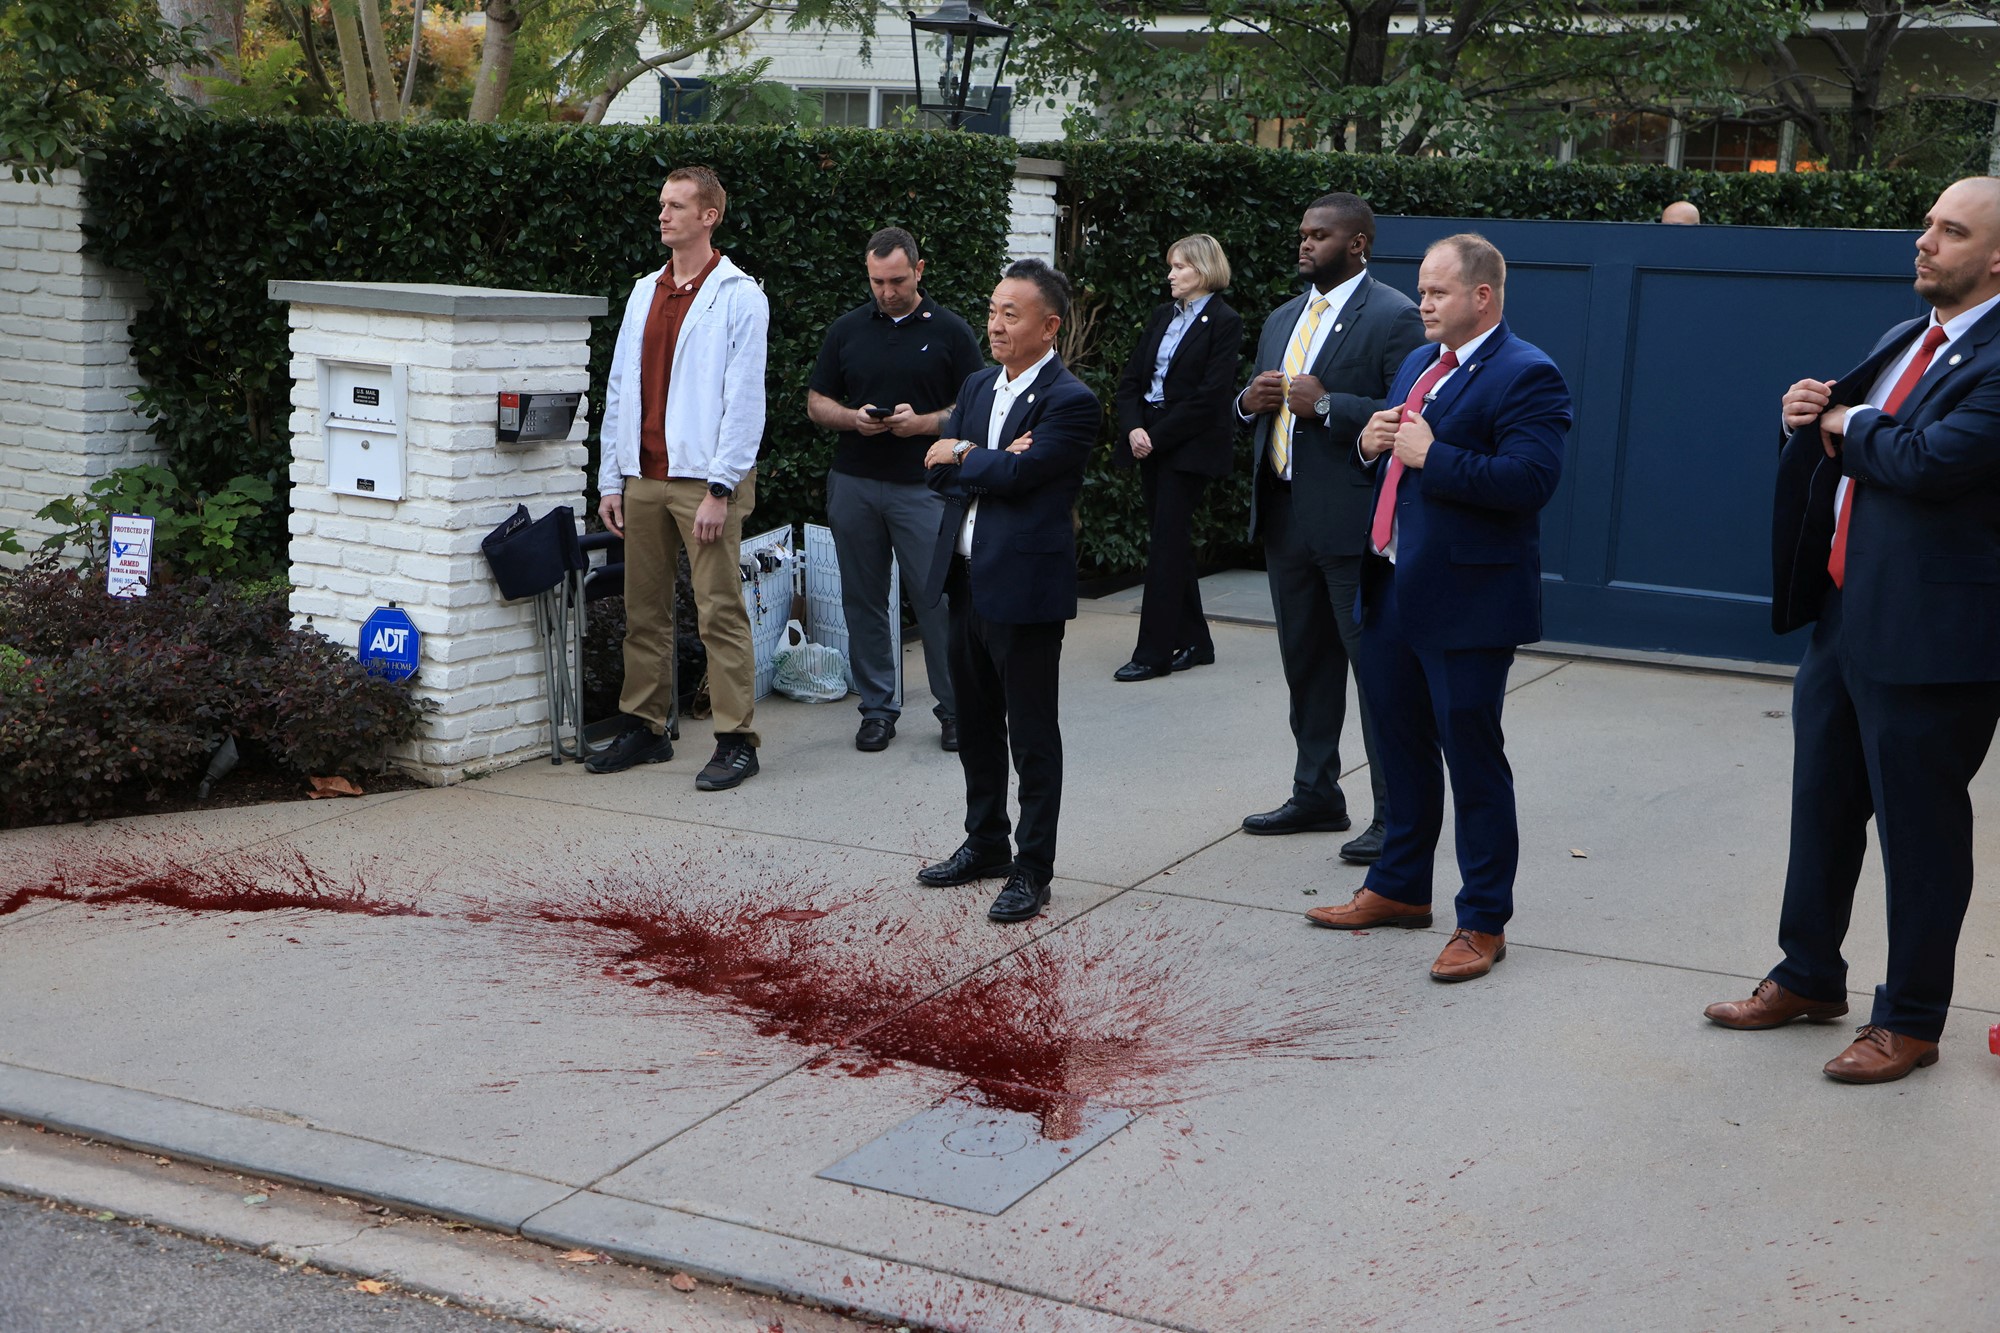 People stand with arms crossed looking in front spilt fake blood on a driveway